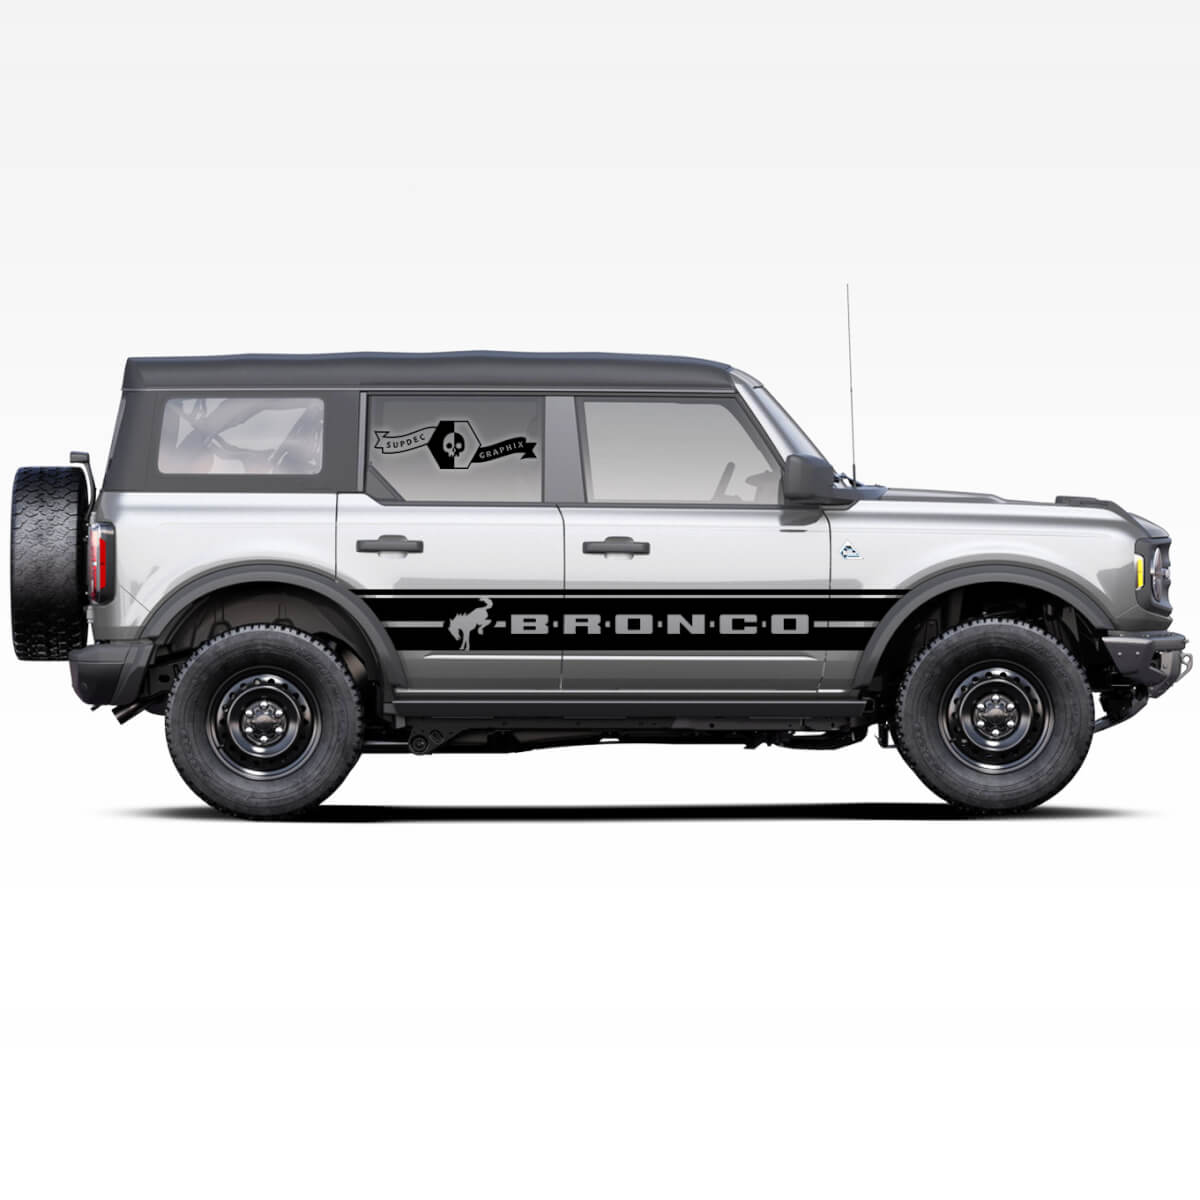 2x Bronco horse stallion Logo Badlands 4-door Wrap Doors Side Thick Strip Decals Stickers for Ford Bronco 2021